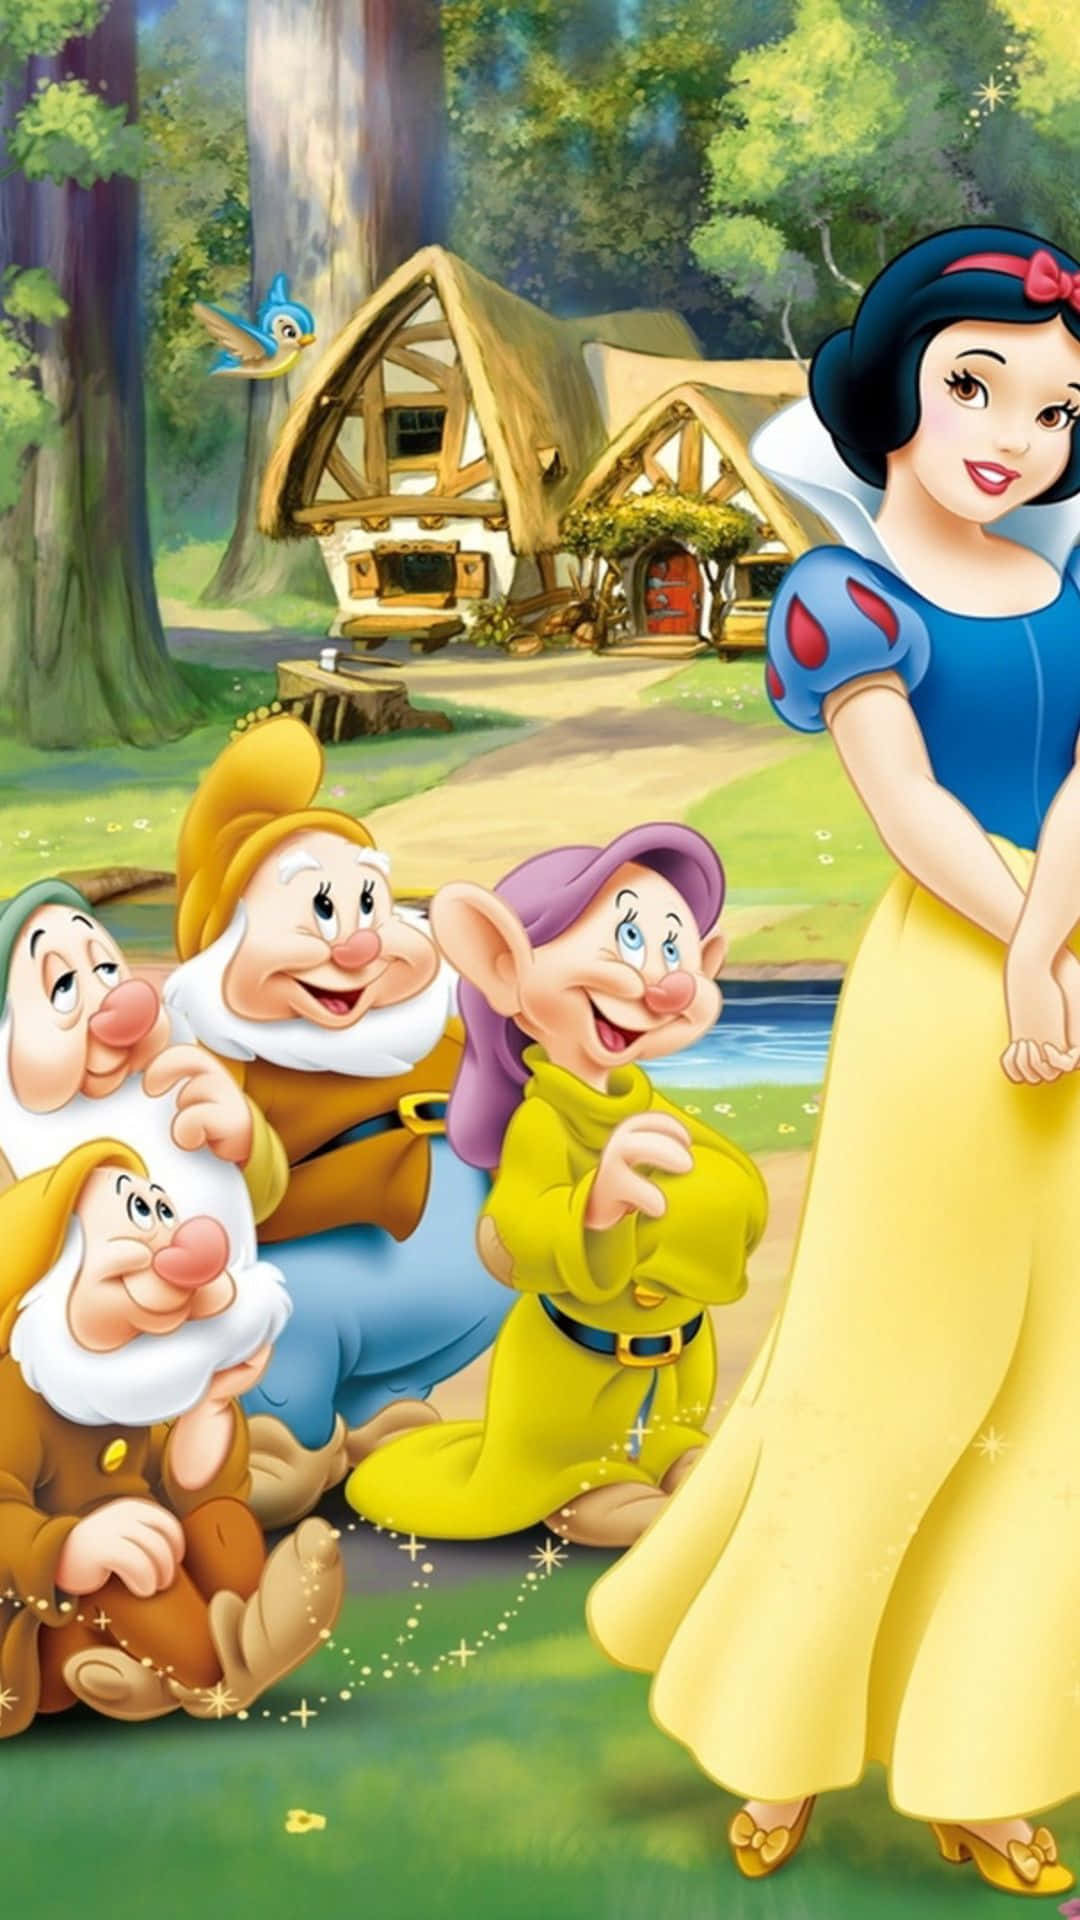 Snow White surrounded by seven dwarfs